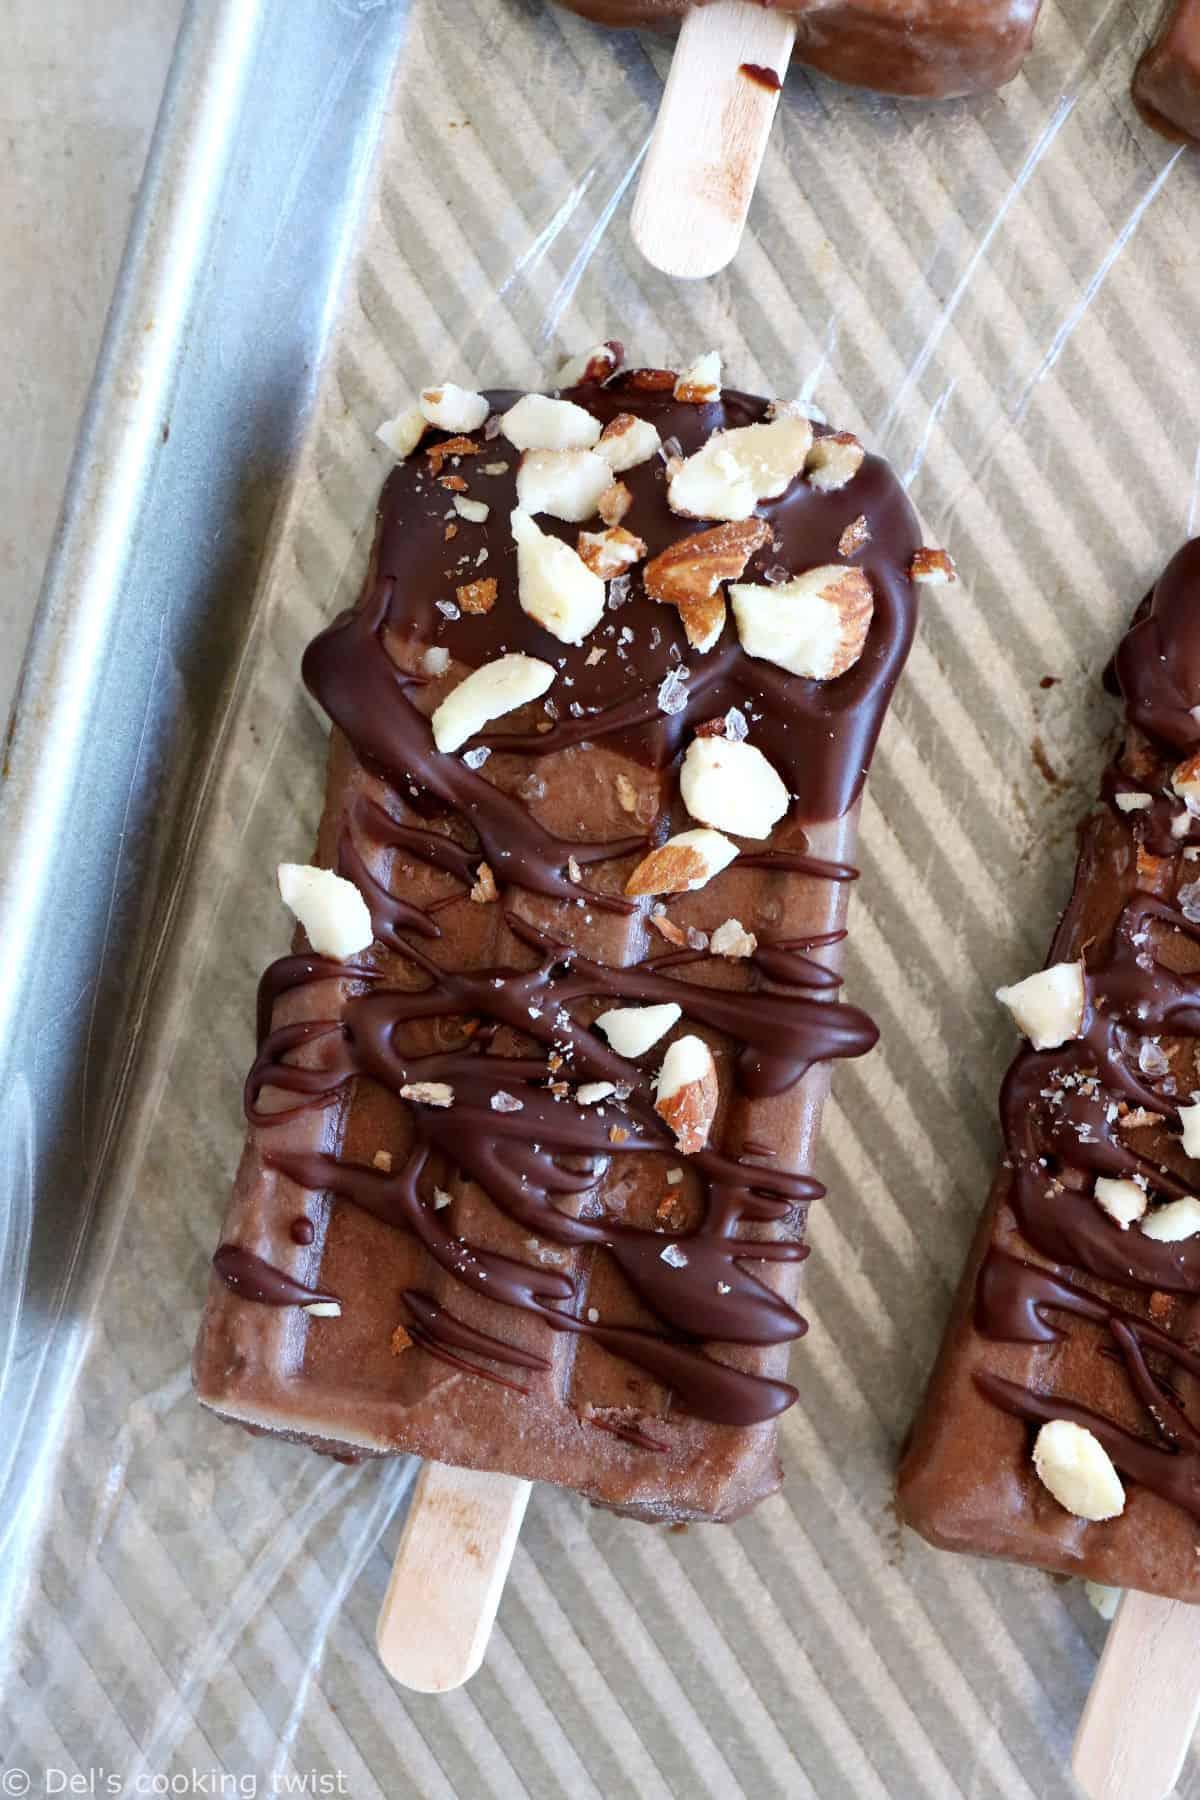 Chocolate almond butter banana popsicles make a decadent summer treat. Both rich and fudgy, they're entirely vegan and prepared with nutritious, natural ingredients. The perfect healthy snack on a stick.